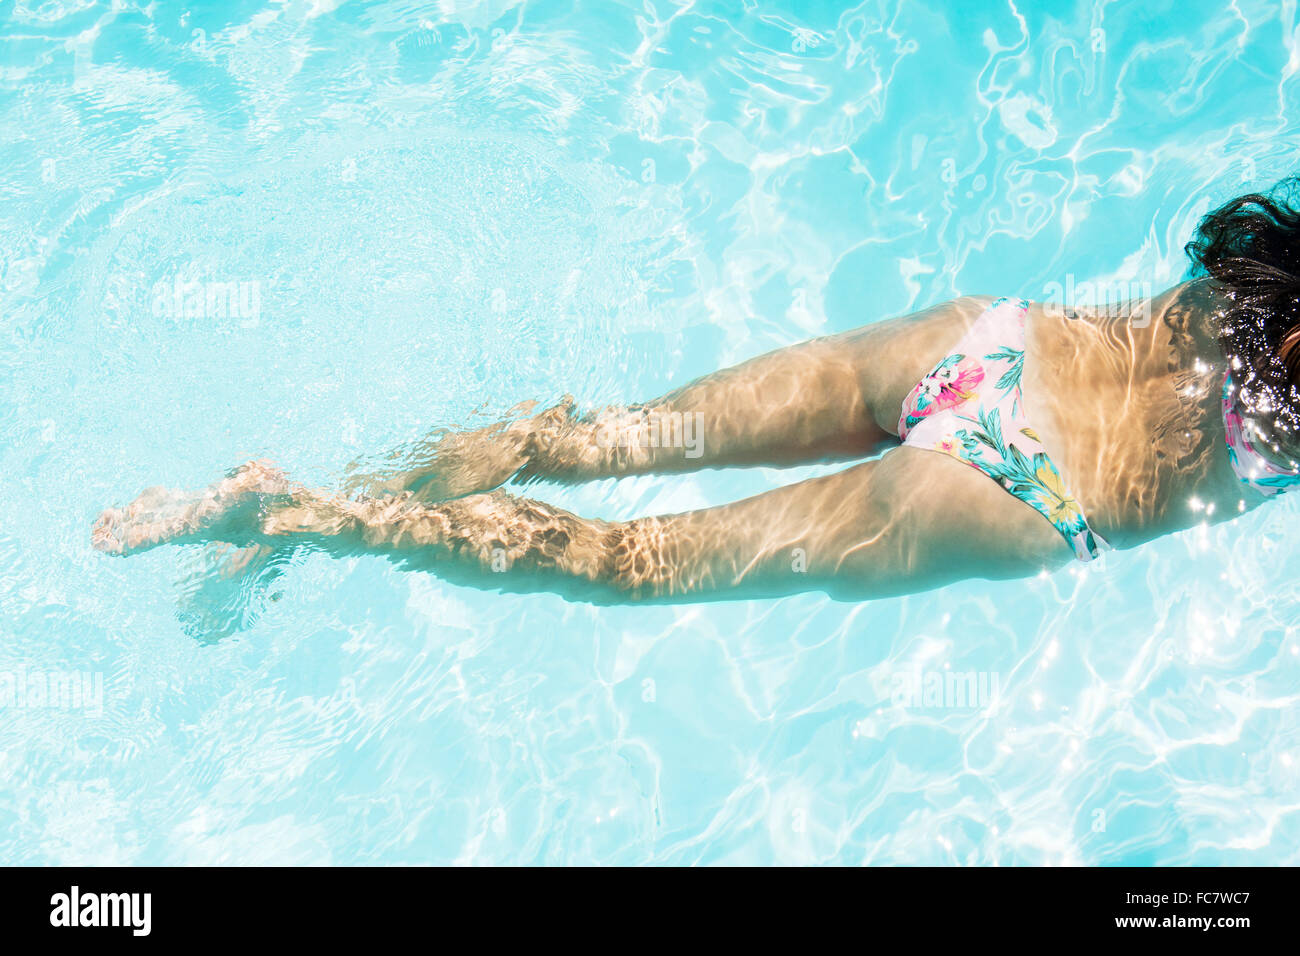 Caucasian woman swimming in pool Banque D'Images